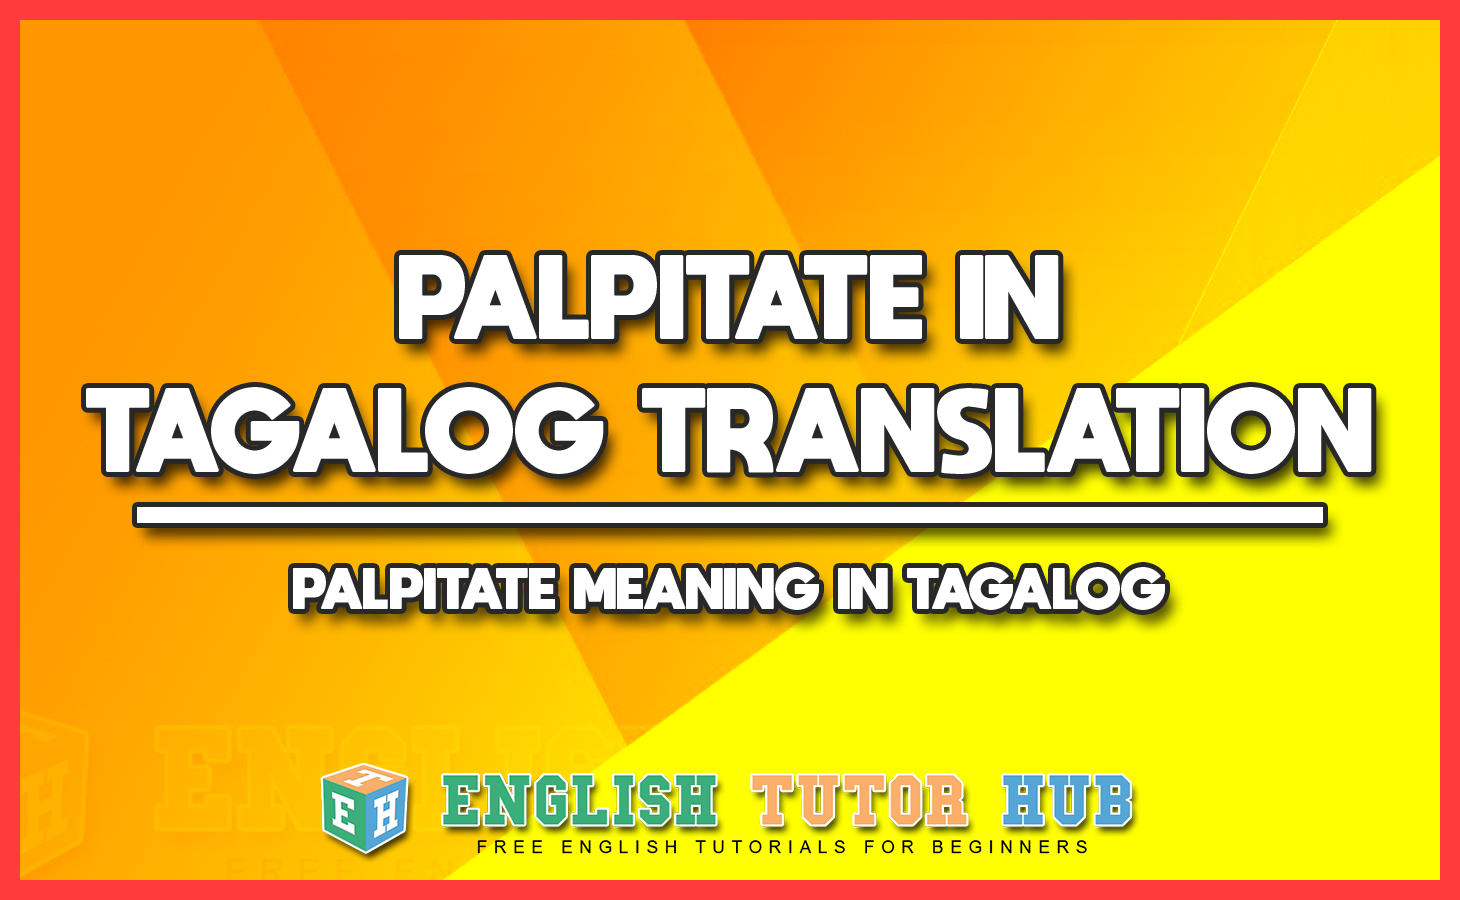 PALPITATE IN TAGALOG TRANSLATION - PALPITATE MEANING IN TAGALOG